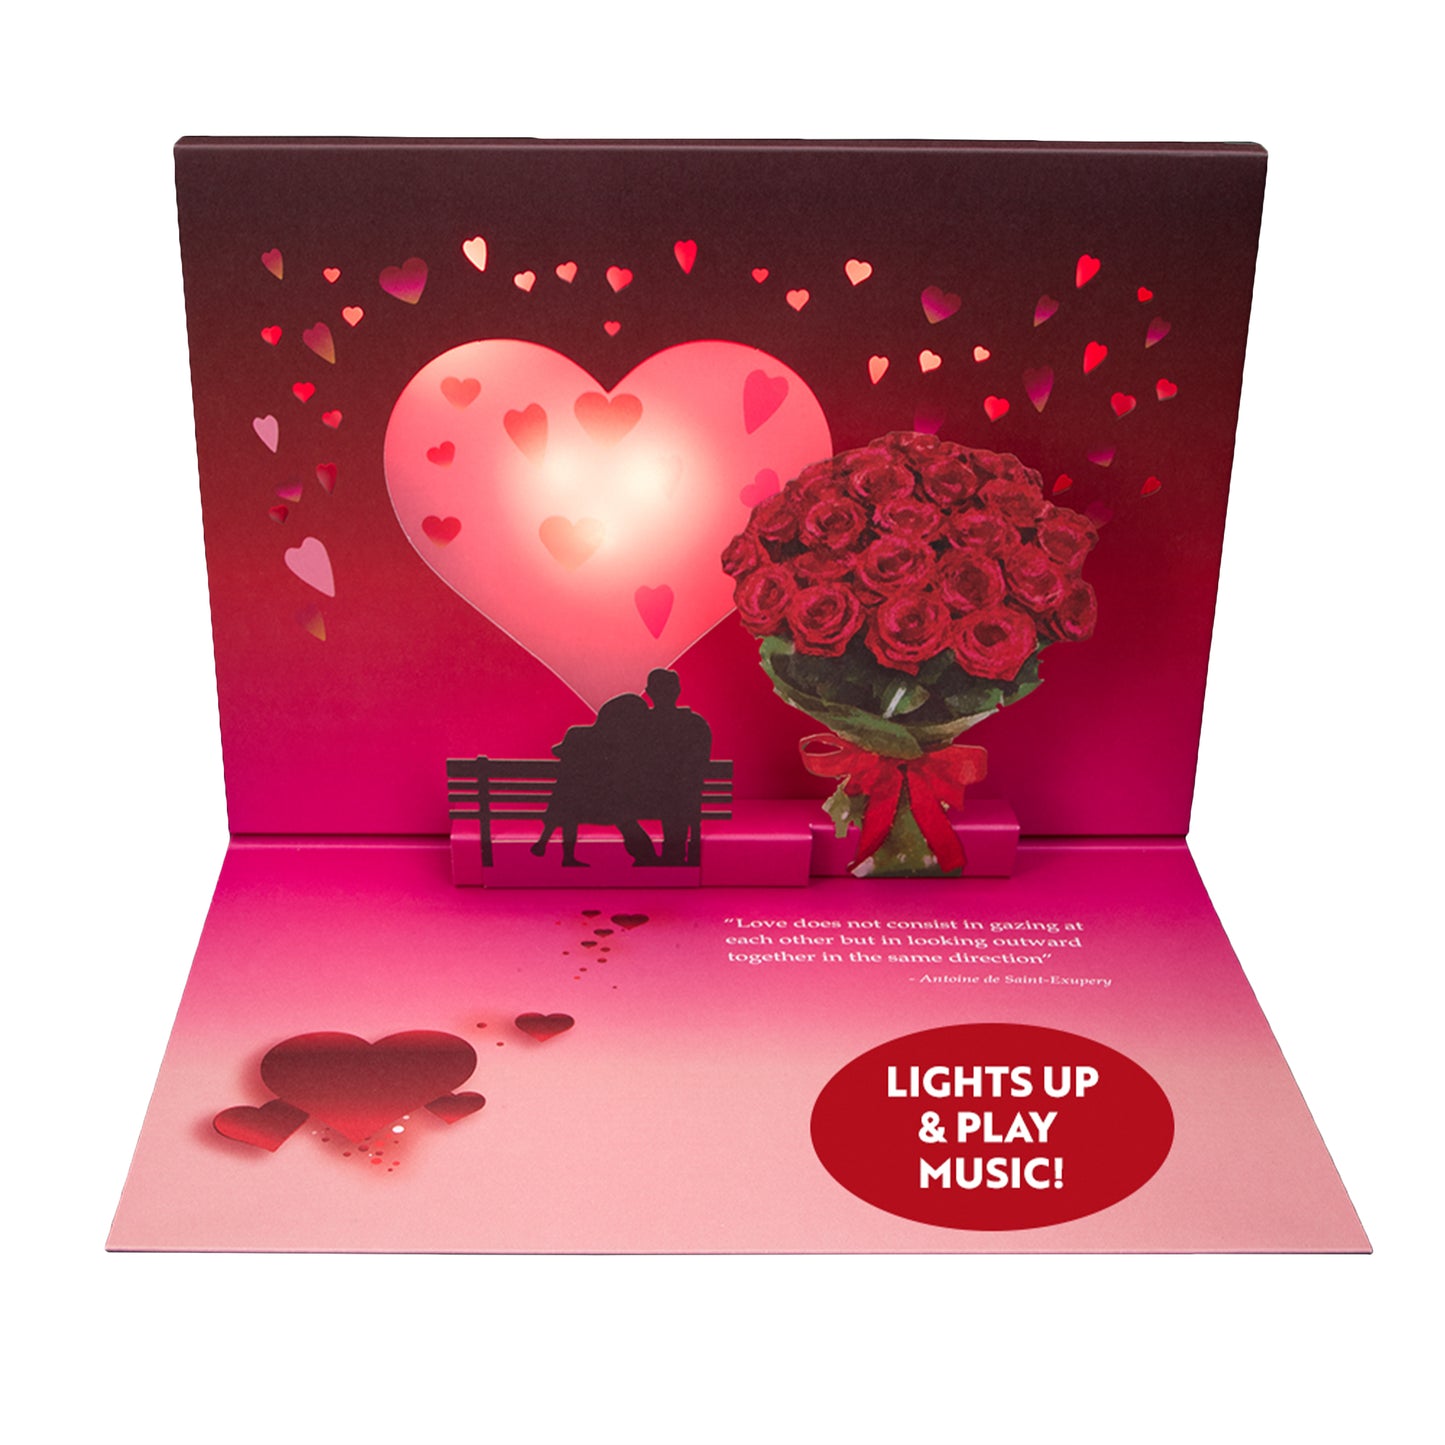 Unchained Melody Valentines Card